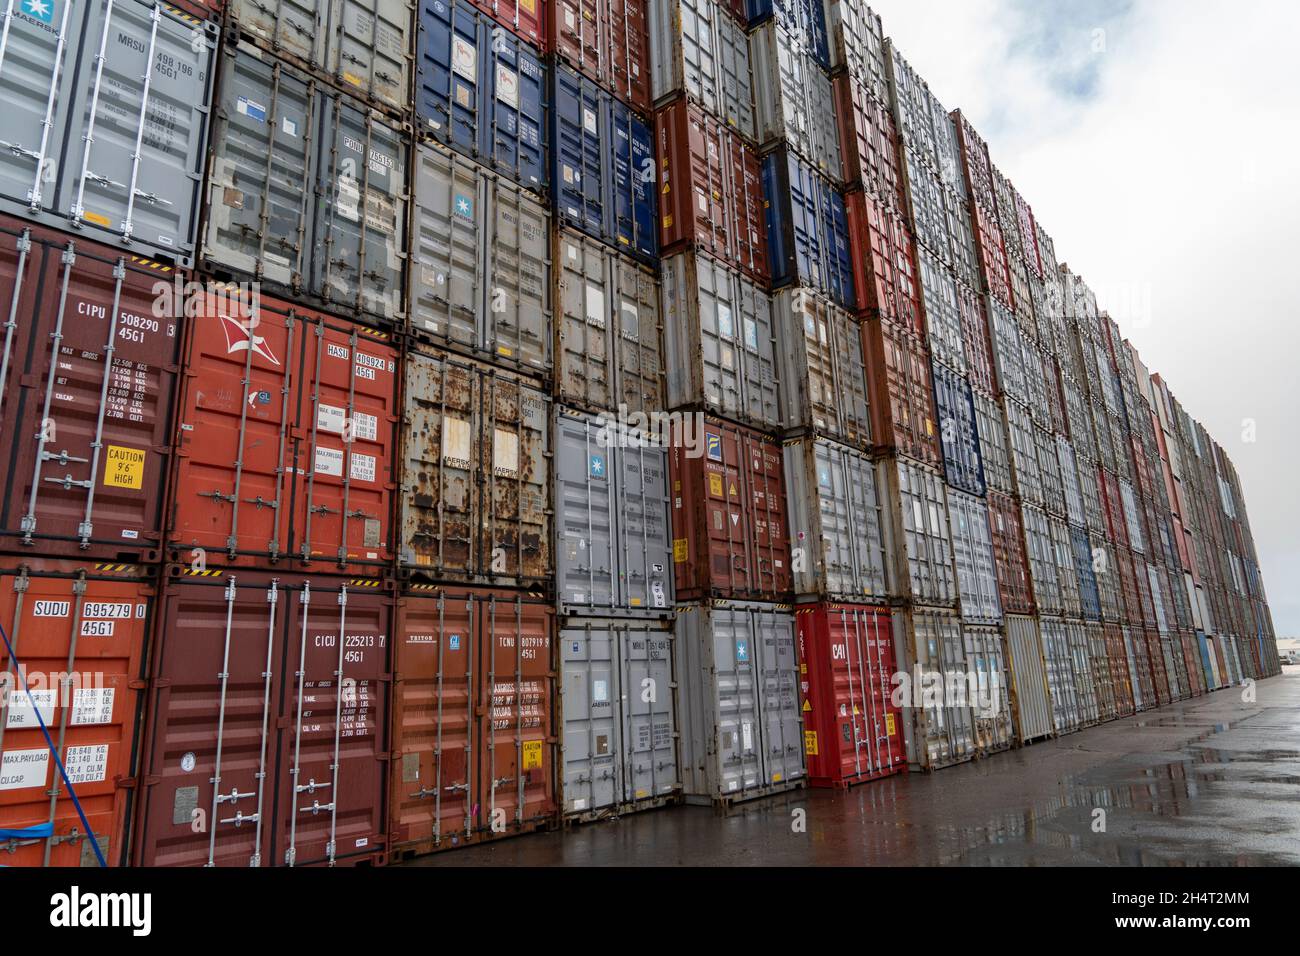 How High Can You Stack Shipping Containers?